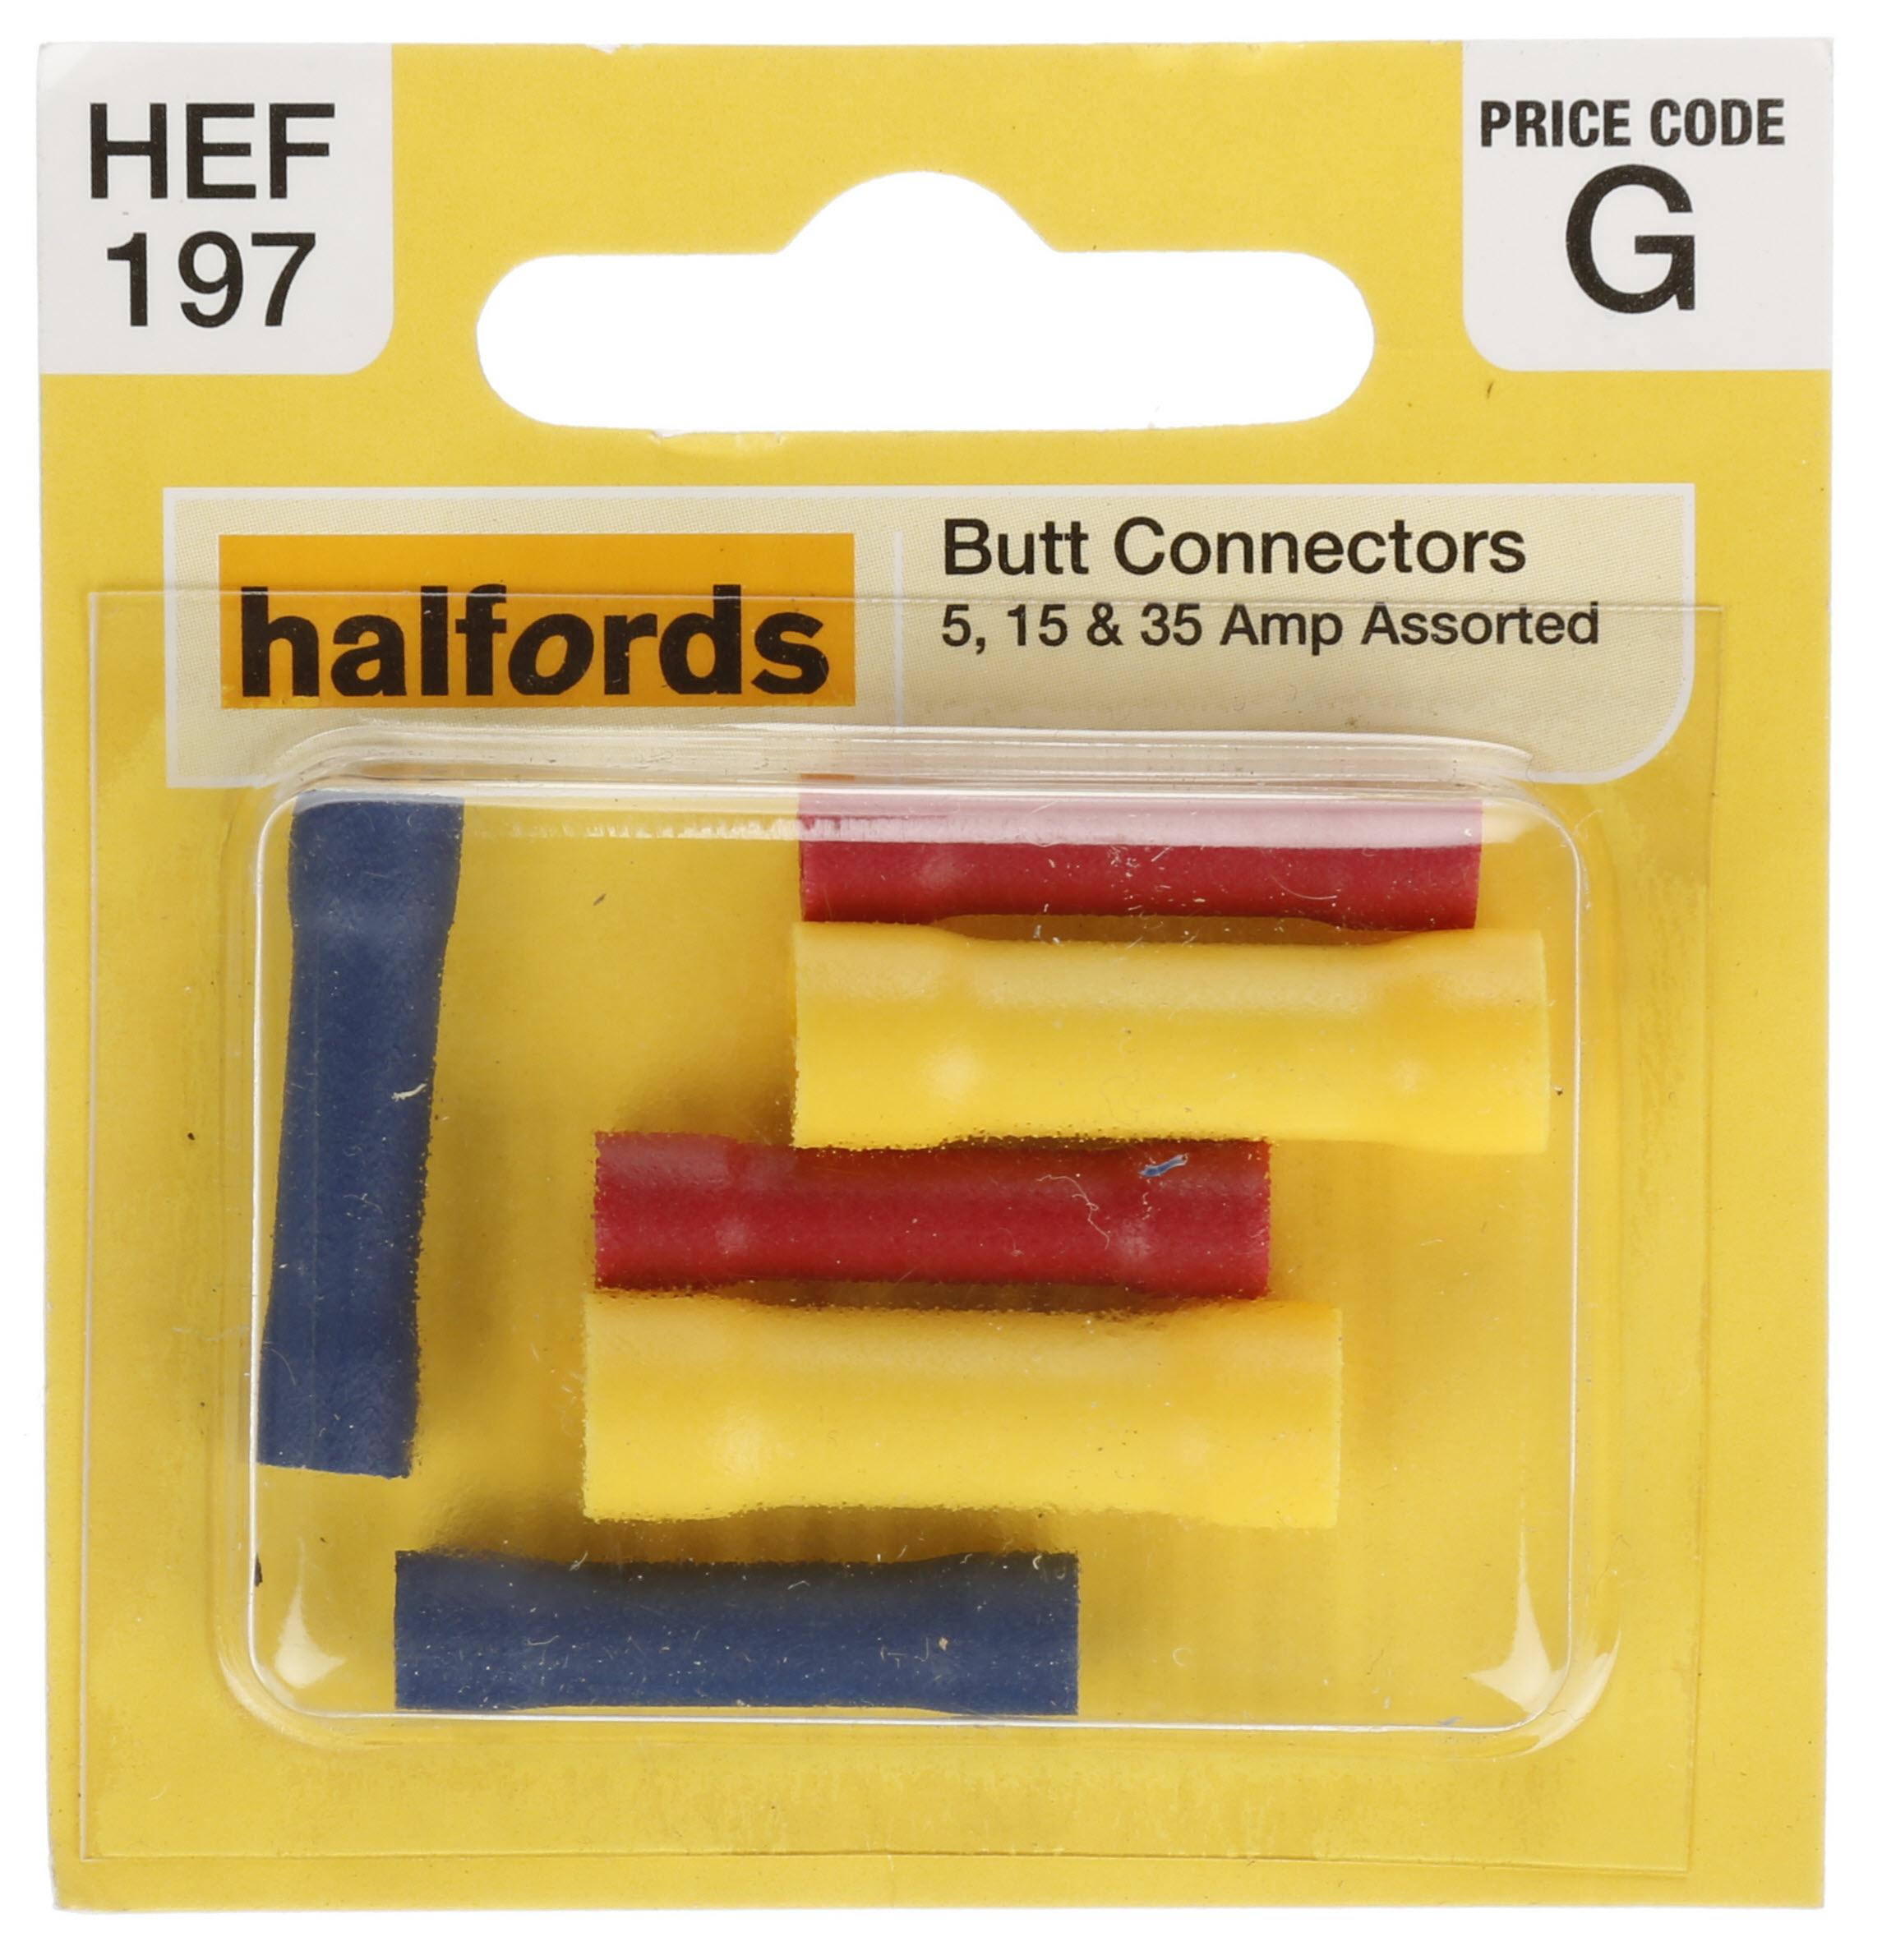 Halfords Assorted Male & Female Bullet Connectors 5, 15 & 35 Amp (Hef197)